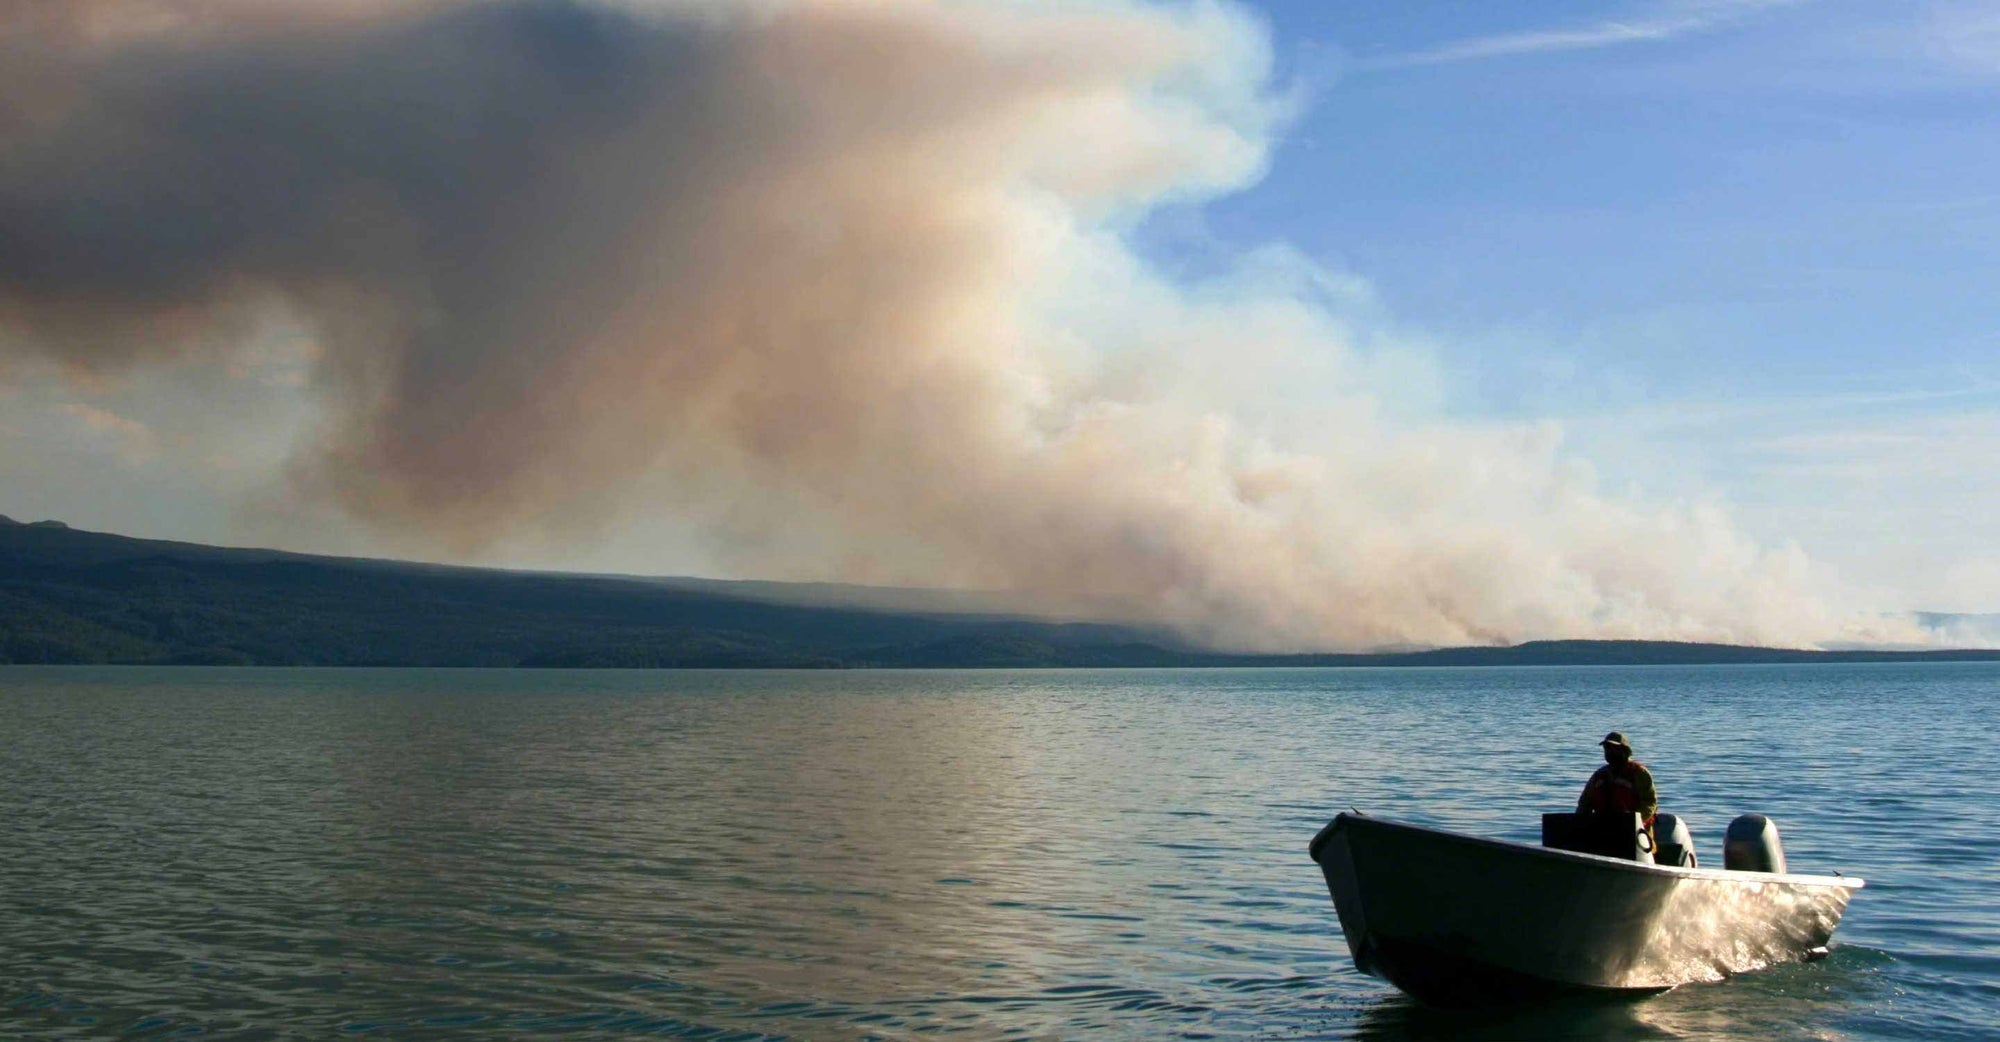 Alaskan wildfire view from lake